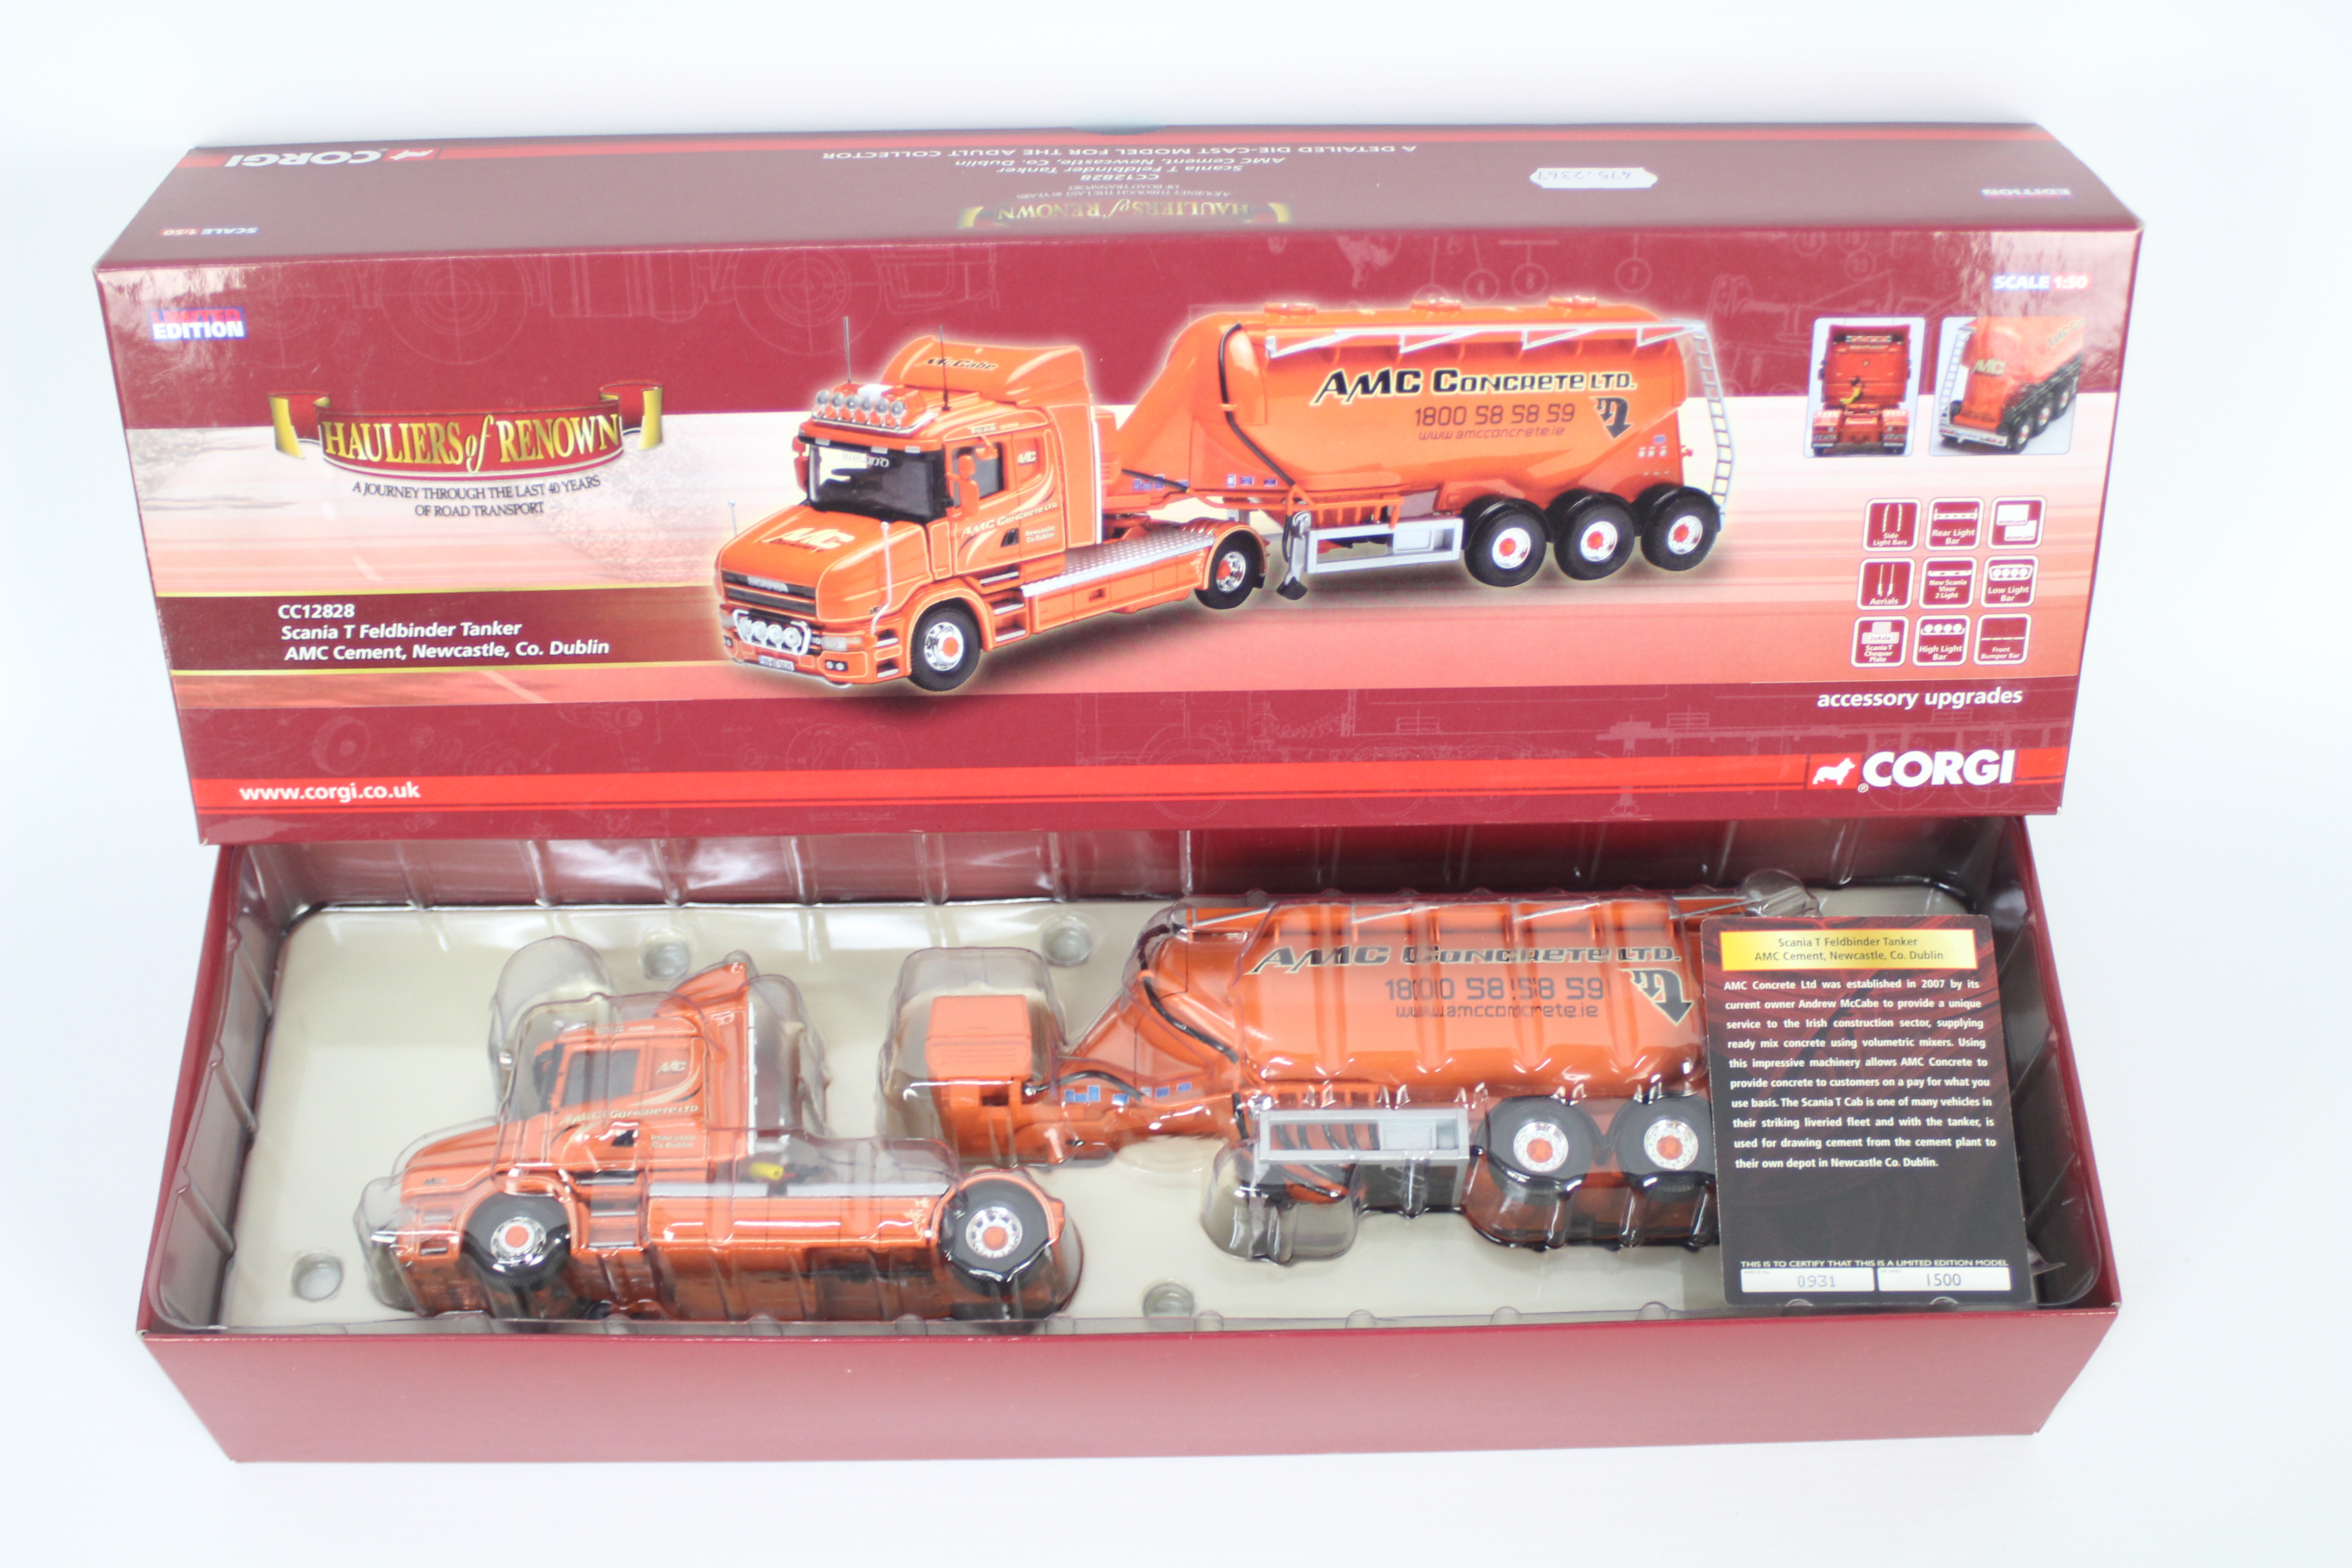 Corgi - Hauliers Of Renown - A boxed limited edition Scania T Feldbinder Tanker in AMC Cement